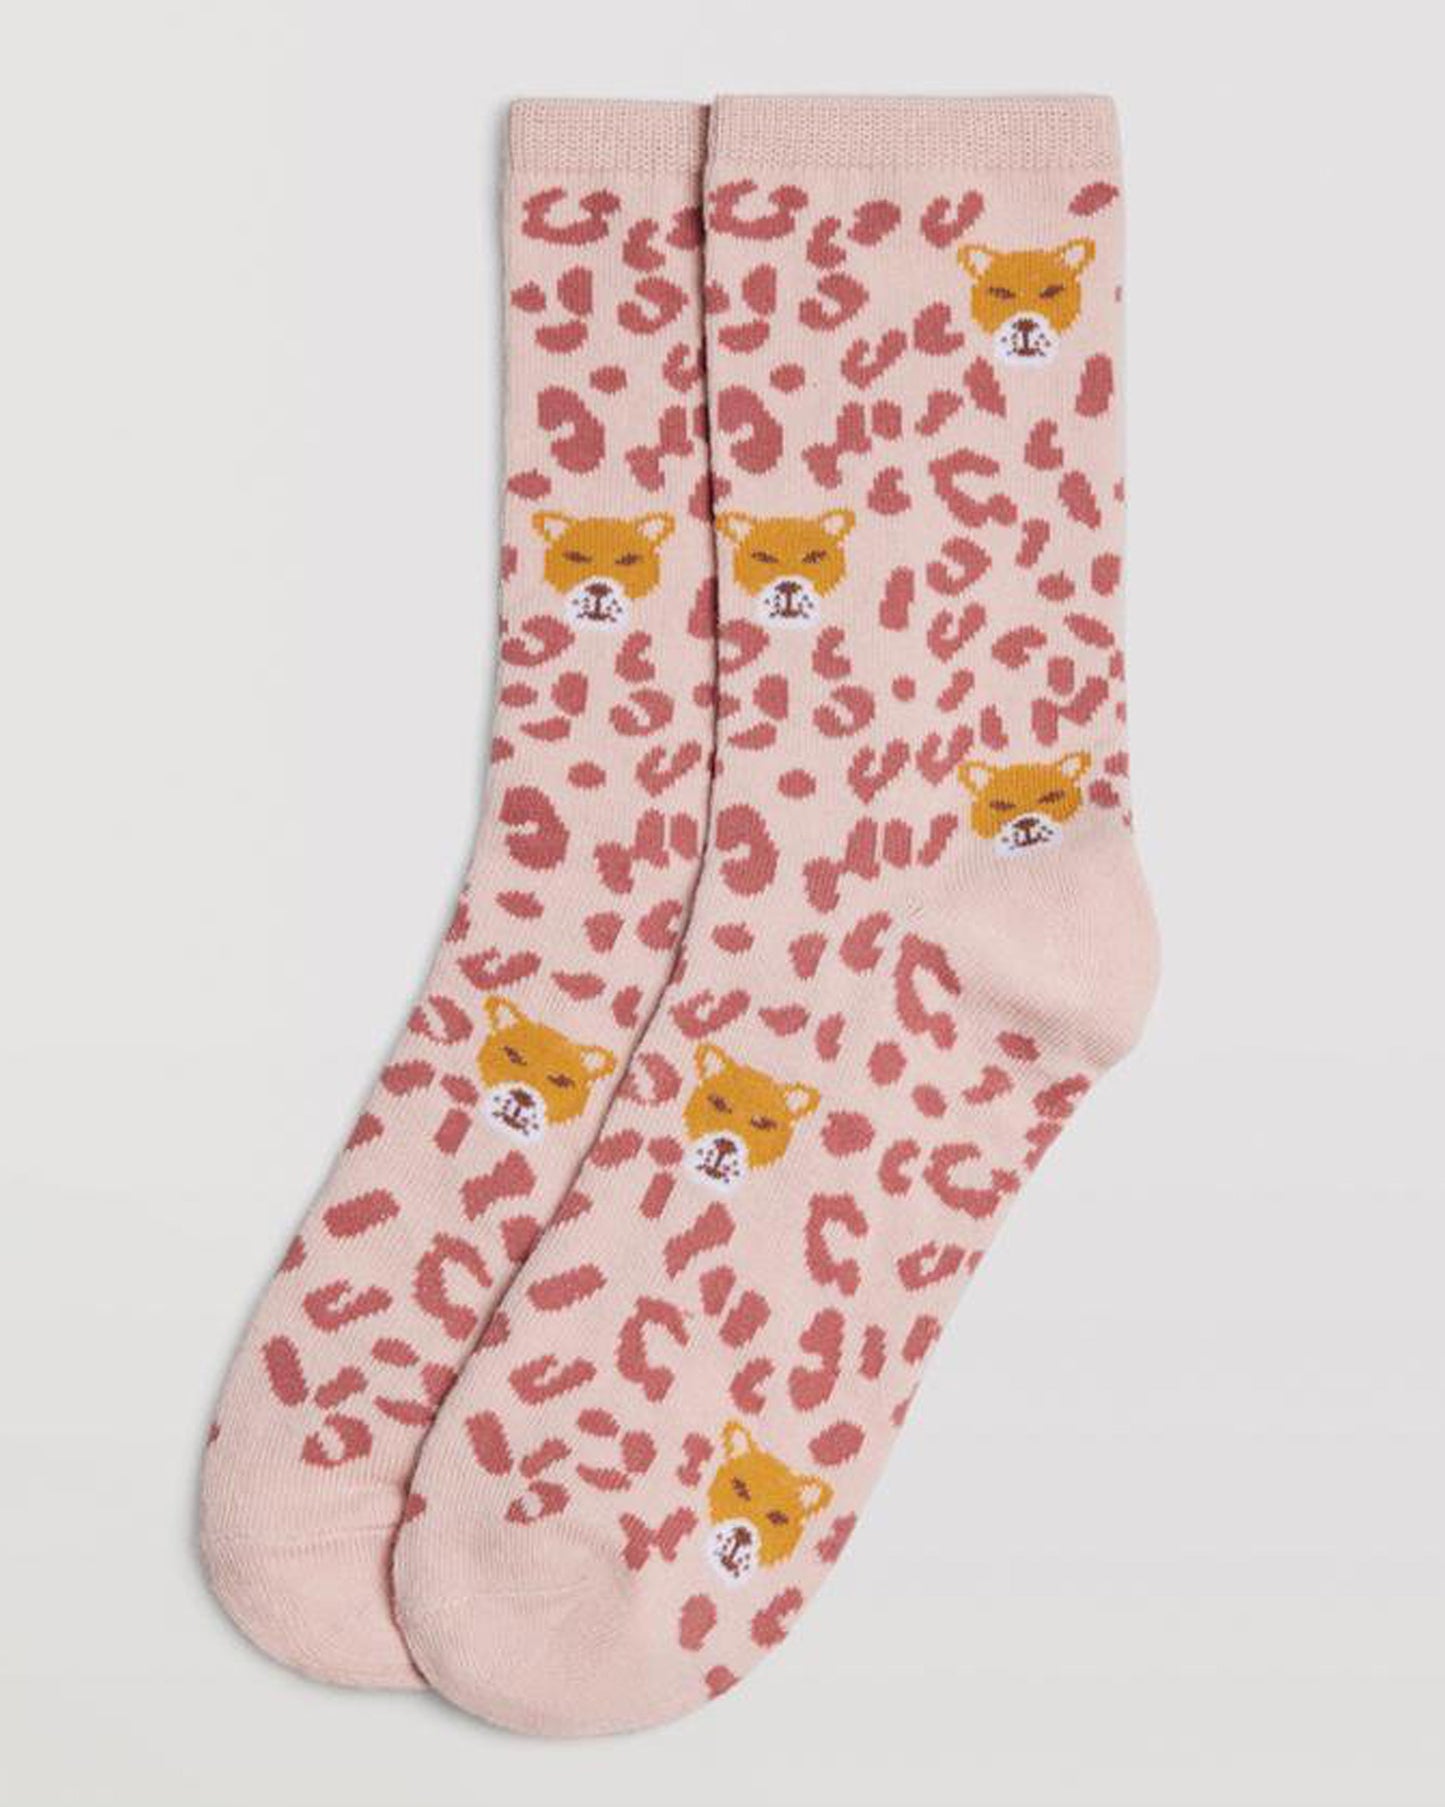 Ysabel Mora 12874 Leopard Sock - Pale light pink cotton crew socks with an all over leopard print pattern in a darker shade of pink and a yellow leopard face, shaped heel, flat toe seam and plain elasticated cuff.